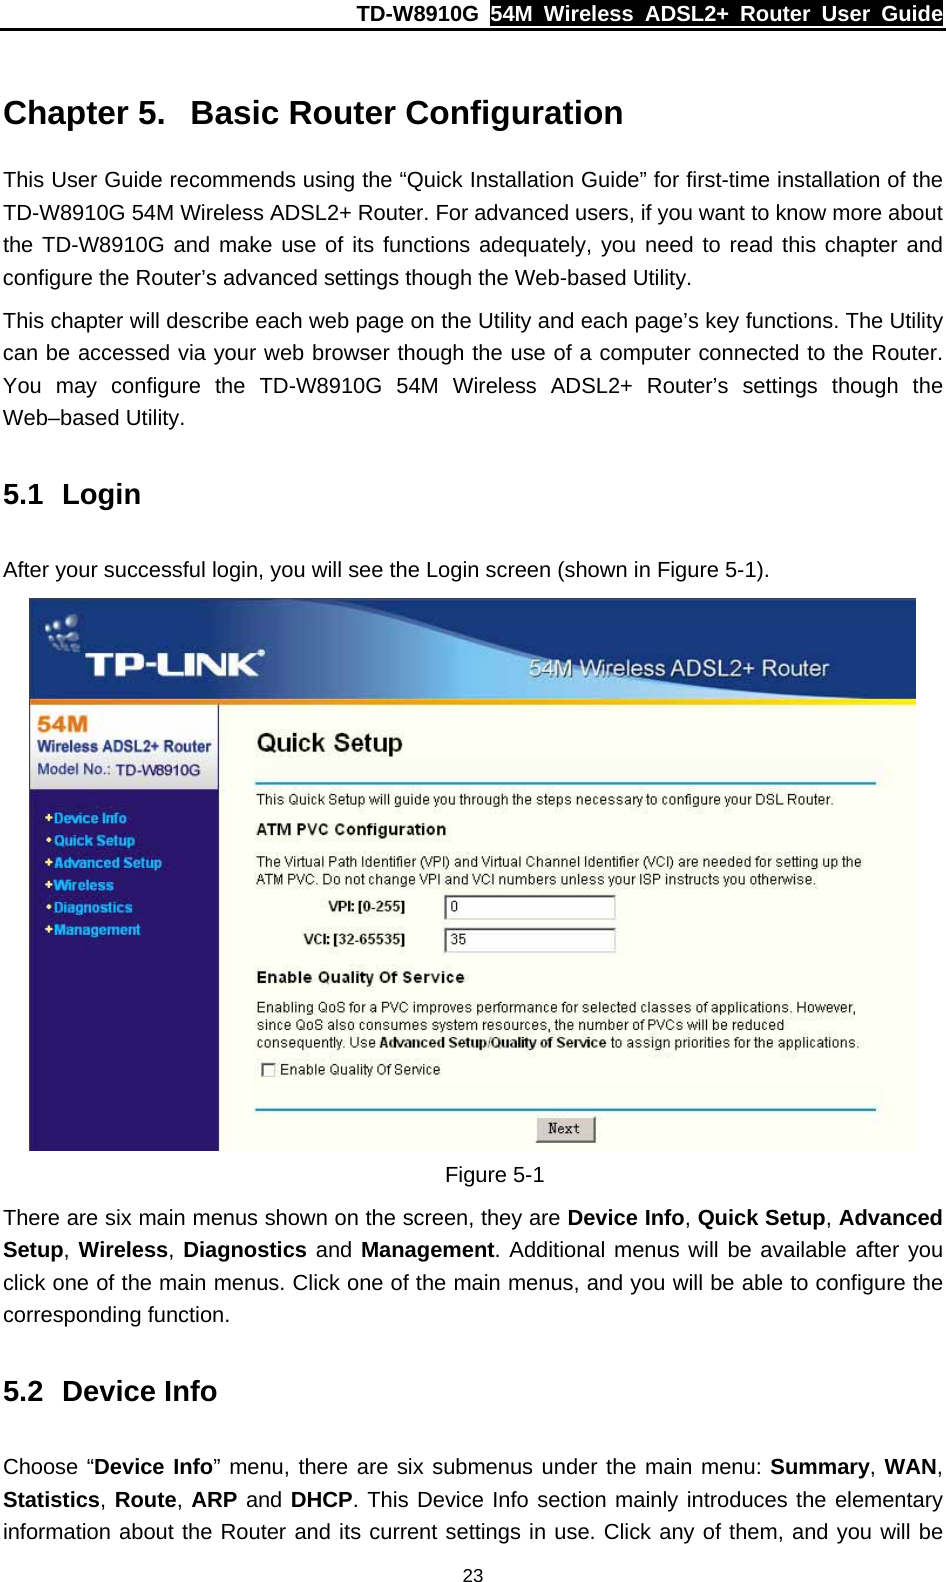 TD-W8910G  54M Wireless ADSL2+ Router User Guide  23 Chapter 5.  Basic Router Configuration This User Guide recommends using the “Quick Installation Guide” for first-time installation of the TD-W8910G 54M Wireless ADSL2+ Router. For advanced users, if you want to know more about the TD-W8910G and make use of its functions adequately, you need to read this chapter and configure the Router’s advanced settings though the Web-based Utility. This chapter will describe each web page on the Utility and each page’s key functions. The Utility can be accessed via your web browser though the use of a computer connected to the Router. You may configure the TD-W8910G 54M Wireless ADSL2+ Router’s settings though the Web–based Utility. 5.1 Login After your successful login, you will see the Login screen (shown in Figure 5-1).  Figure 5-1 There are six main menus shown on the screen, they are Device Info, Quick Setup, Advanced Setup, Wireless, Diagnostics and Management. Additional menus will be available after you click one of the main menus. Click one of the main menus, and you will be able to configure the corresponding function. 5.2 Device Info Choose “Device Info” menu, there are six submenus under the main menu: Summary, WAN, Statistics, Route, ARP and DHCP. This Device Info section mainly introduces the elementary information about the Router and its current settings in use. Click any of them, and you will be 